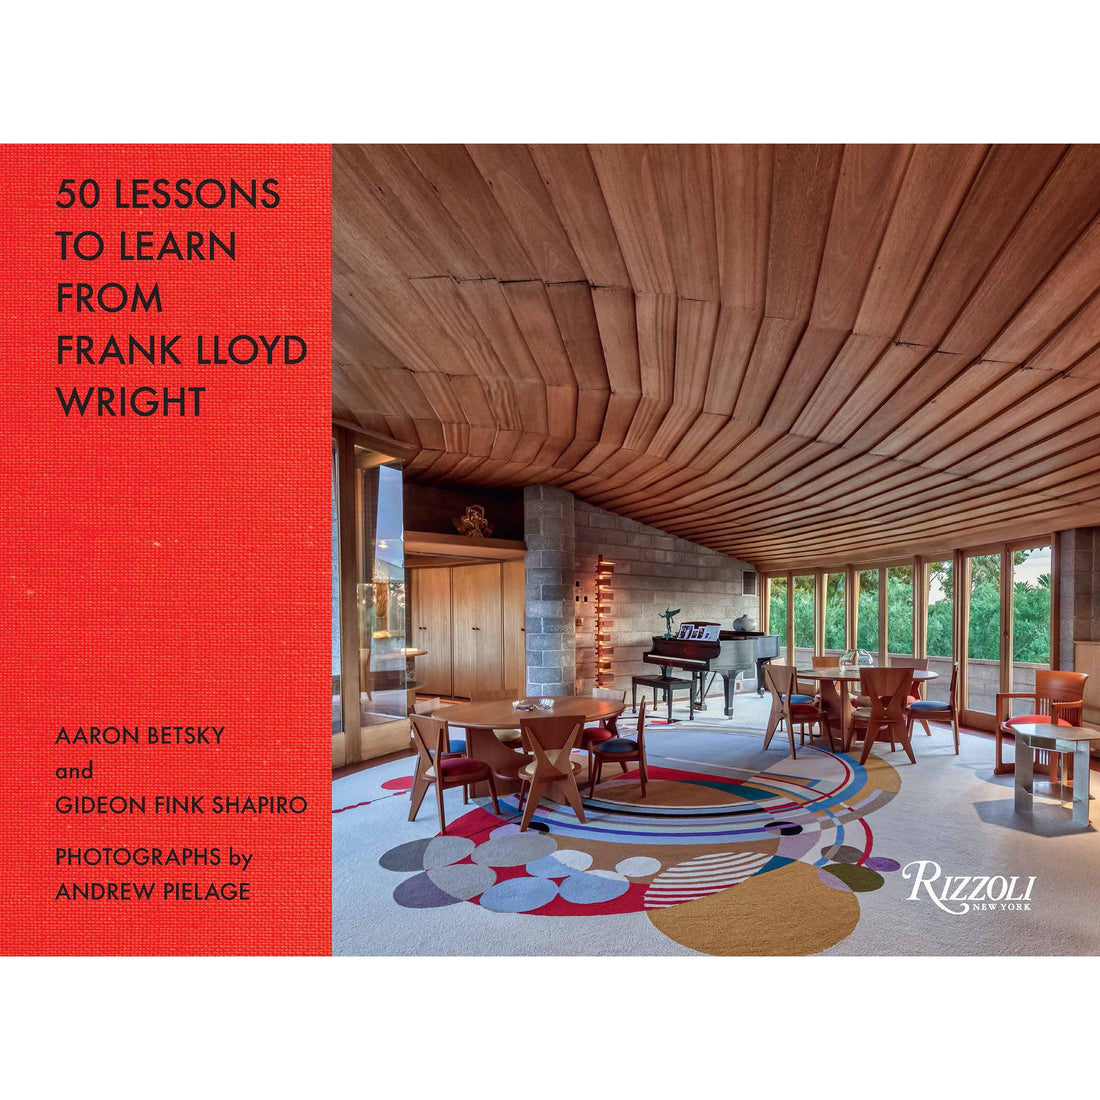 RIZZOLI - 50 LESSONS TO LEARN FROM FRANK LLYOD WRIGHT